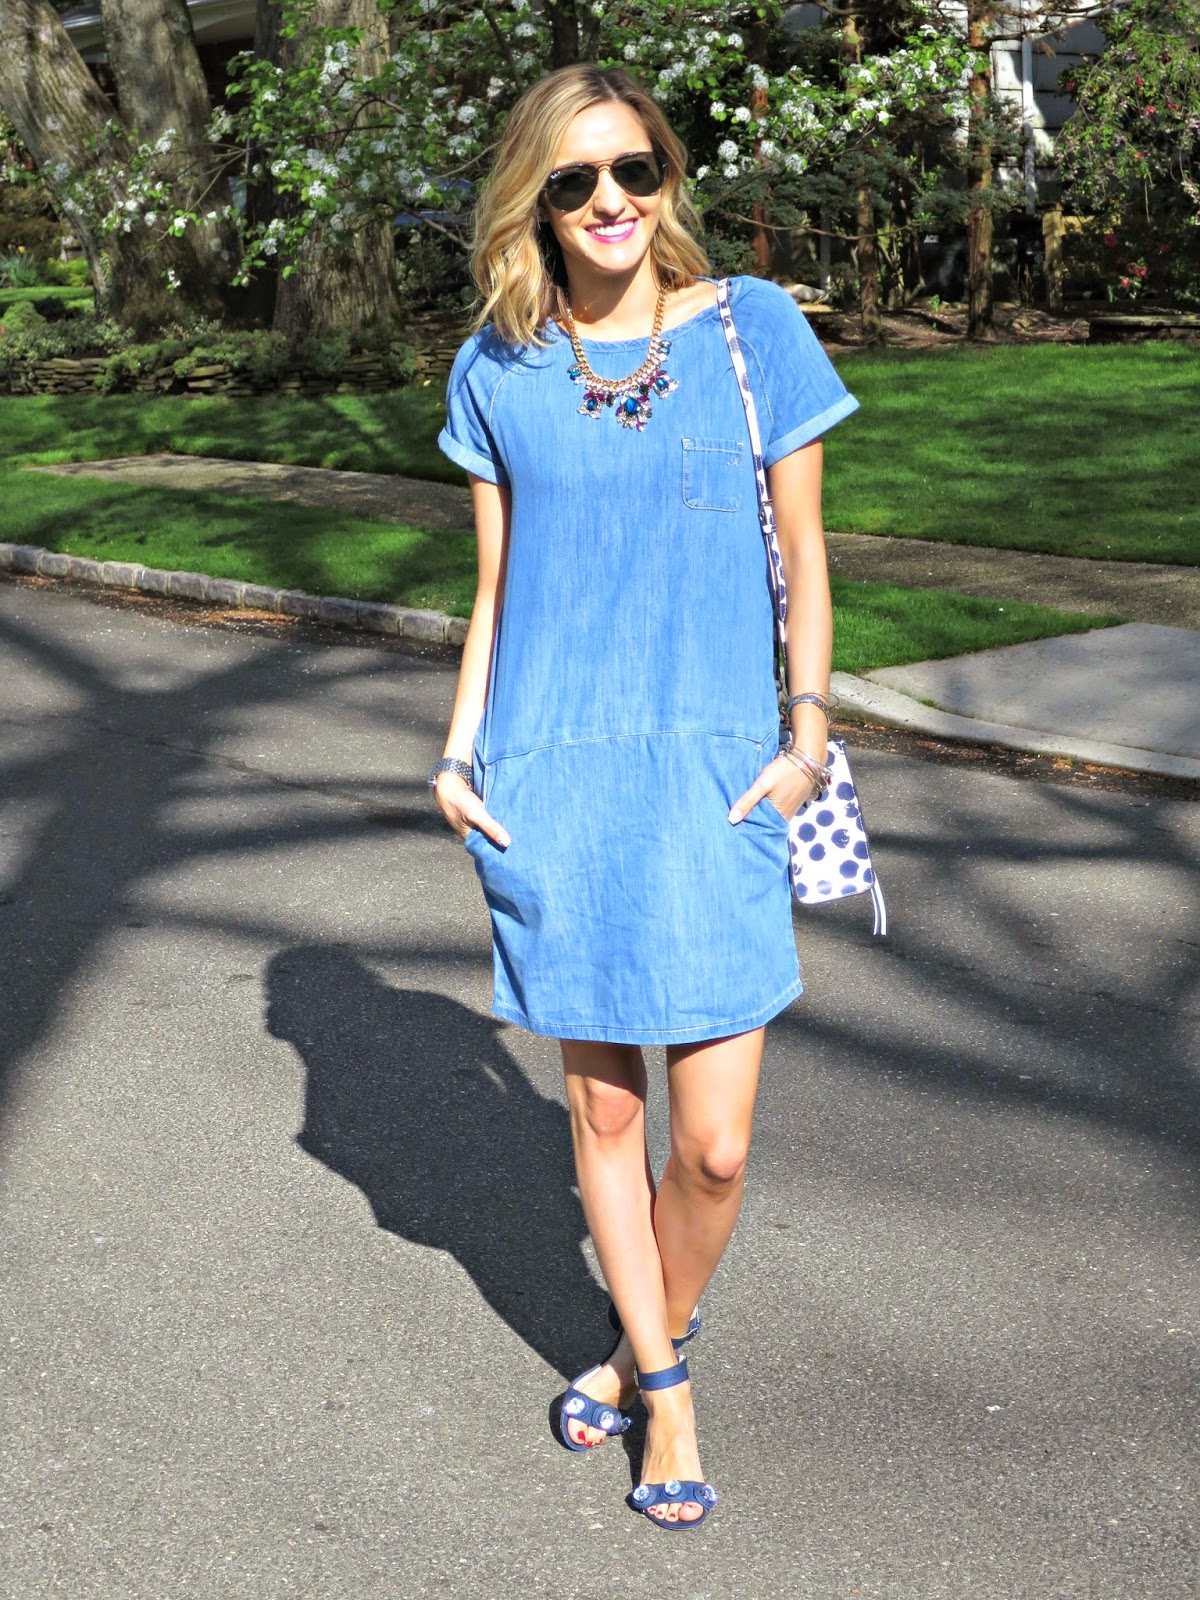 Michelle's Pa(i)ge | Fashion Blogger based in New York: DENIM + DOTS